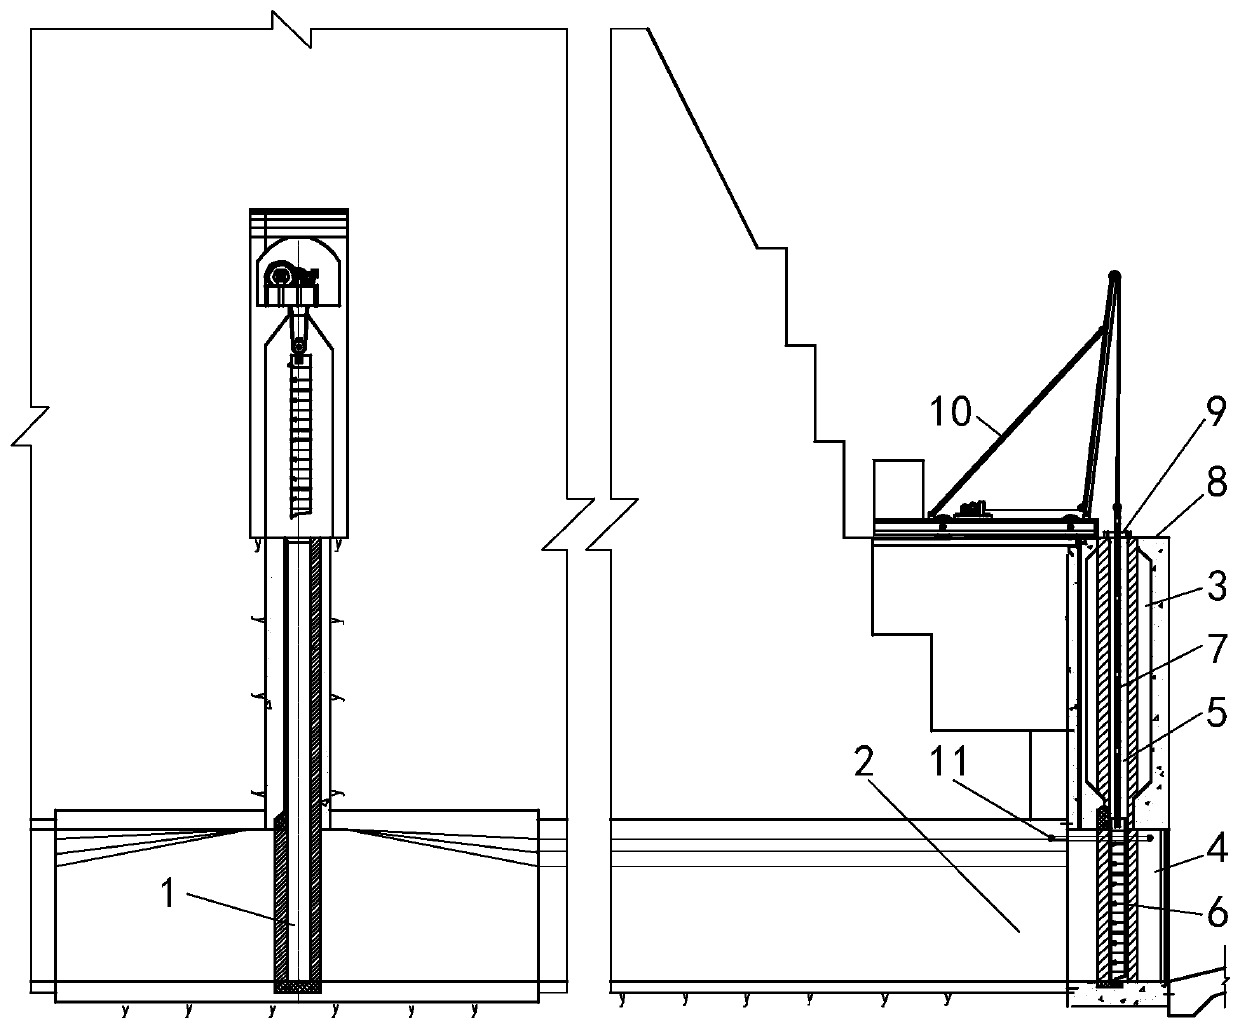 Maintenance method and structure from tail water tunnel access door slot to outlet tunnel section